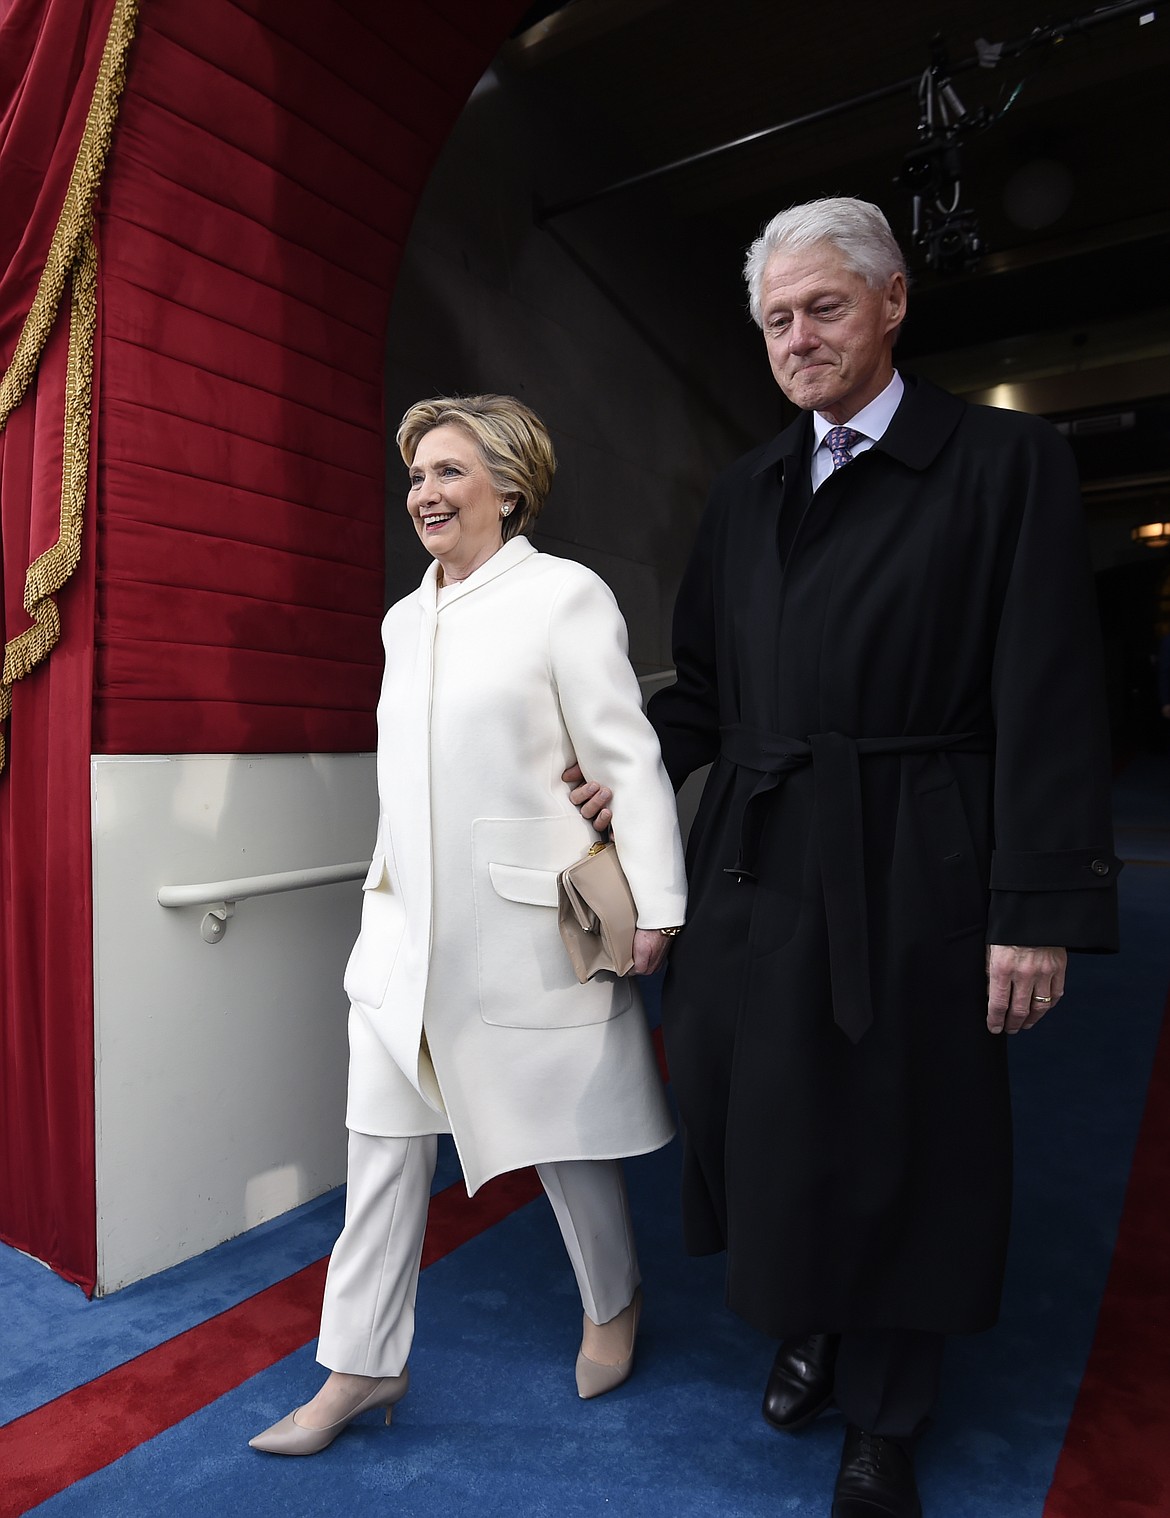 Former President Bill Clinton and his wife Hillary Clinton arrive on Capitol Hill in Washington, Friday, Jan. 20, 2017, for the presidential inauguration of Donald Trump. (Saul Loeb via AP, Pool)